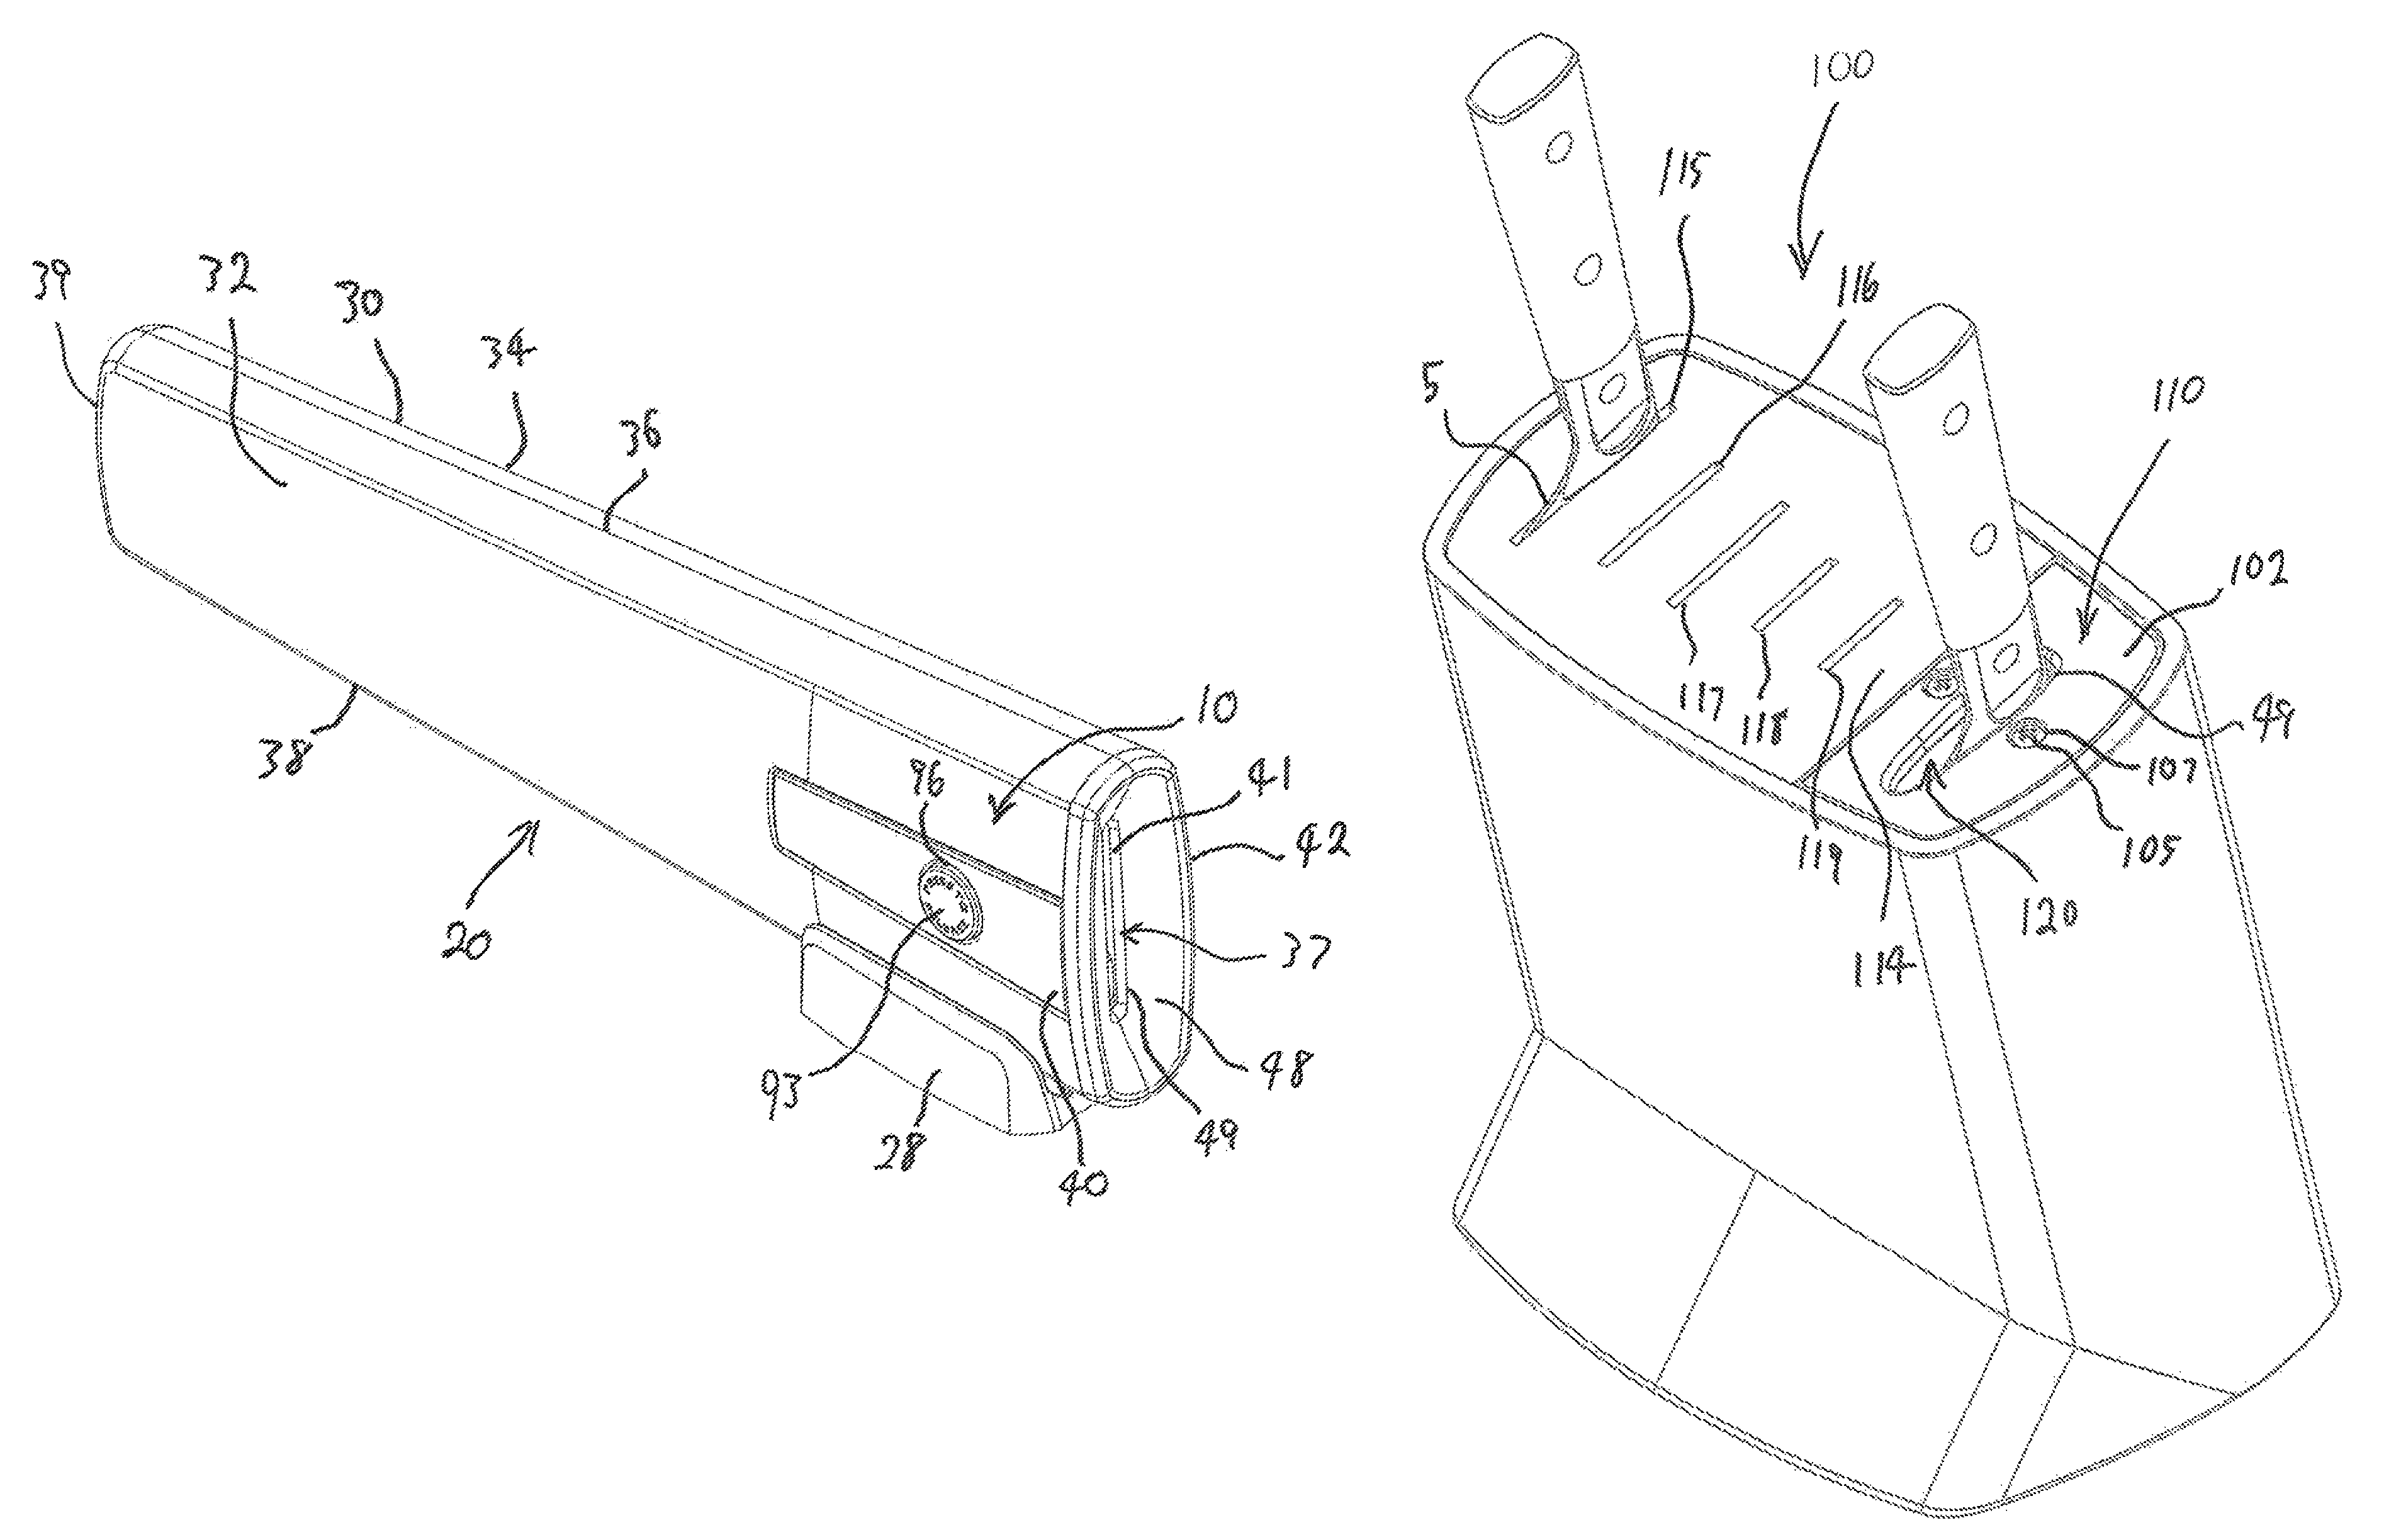 Blade storage device including a blade sharpener and a honing device